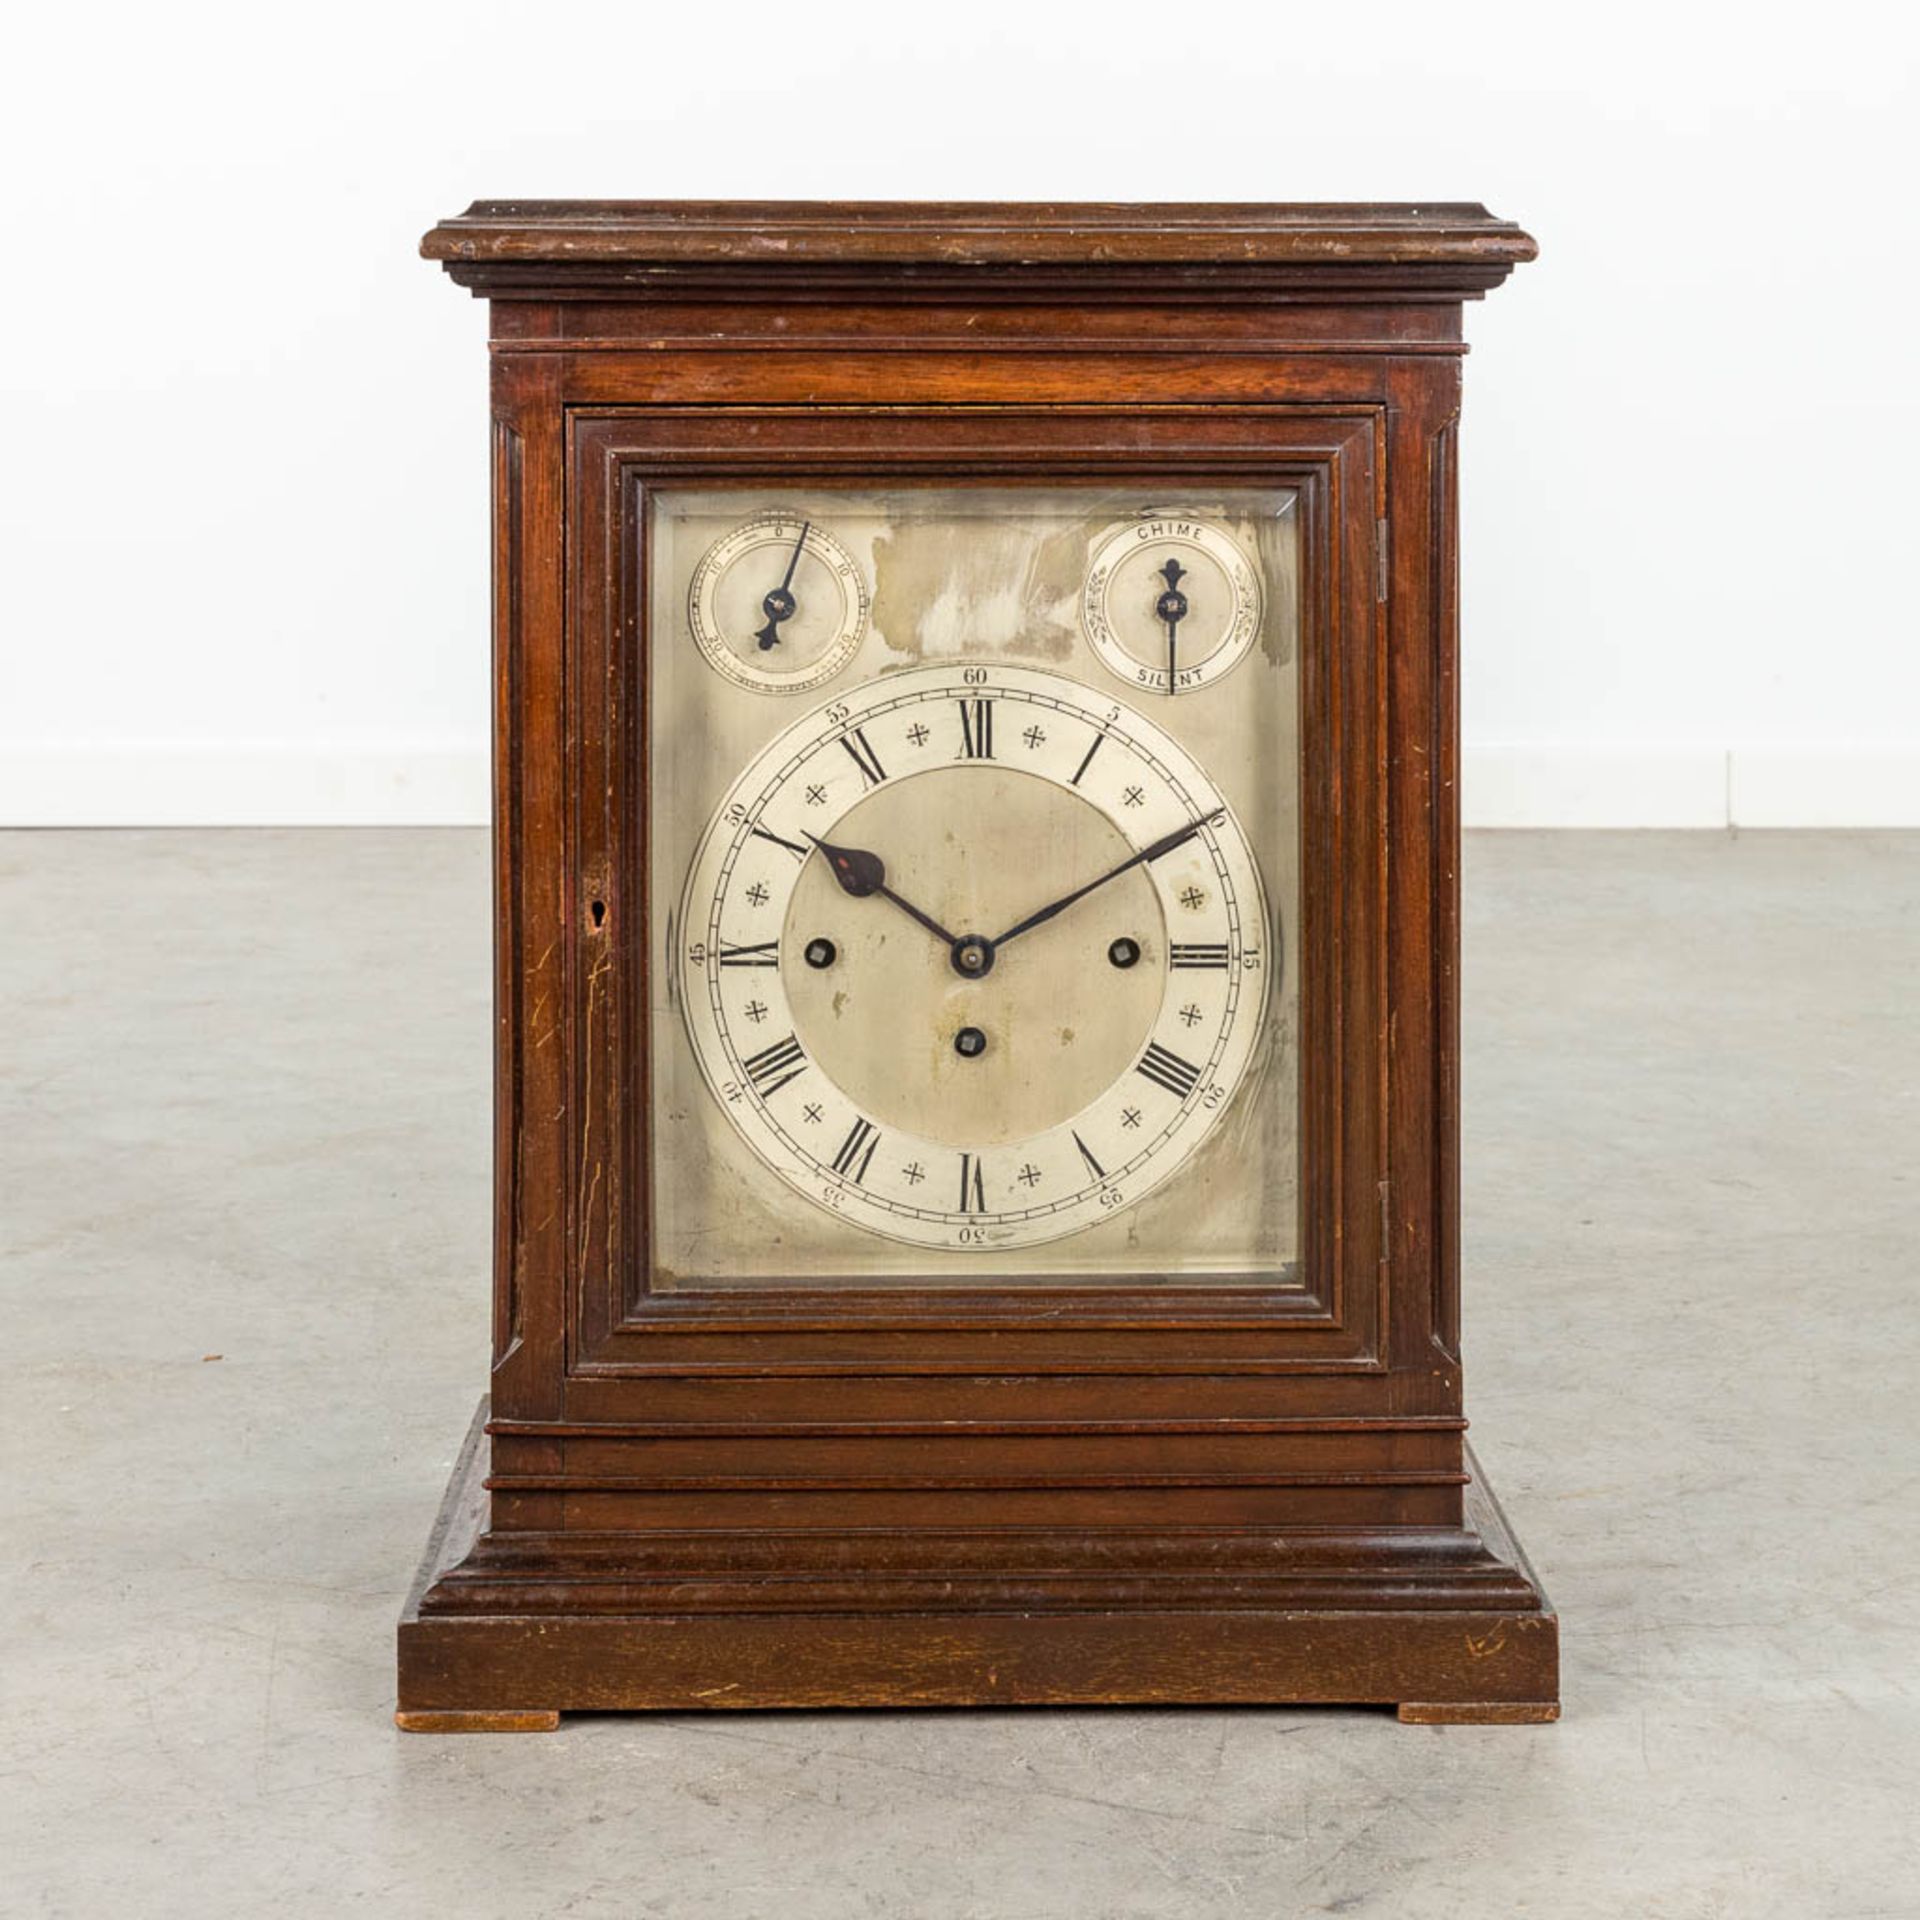 An antique English table clock with 3 gongs. Silver-plated dial and Snek movement. 19th C. (D:25 x W - Image 3 of 14